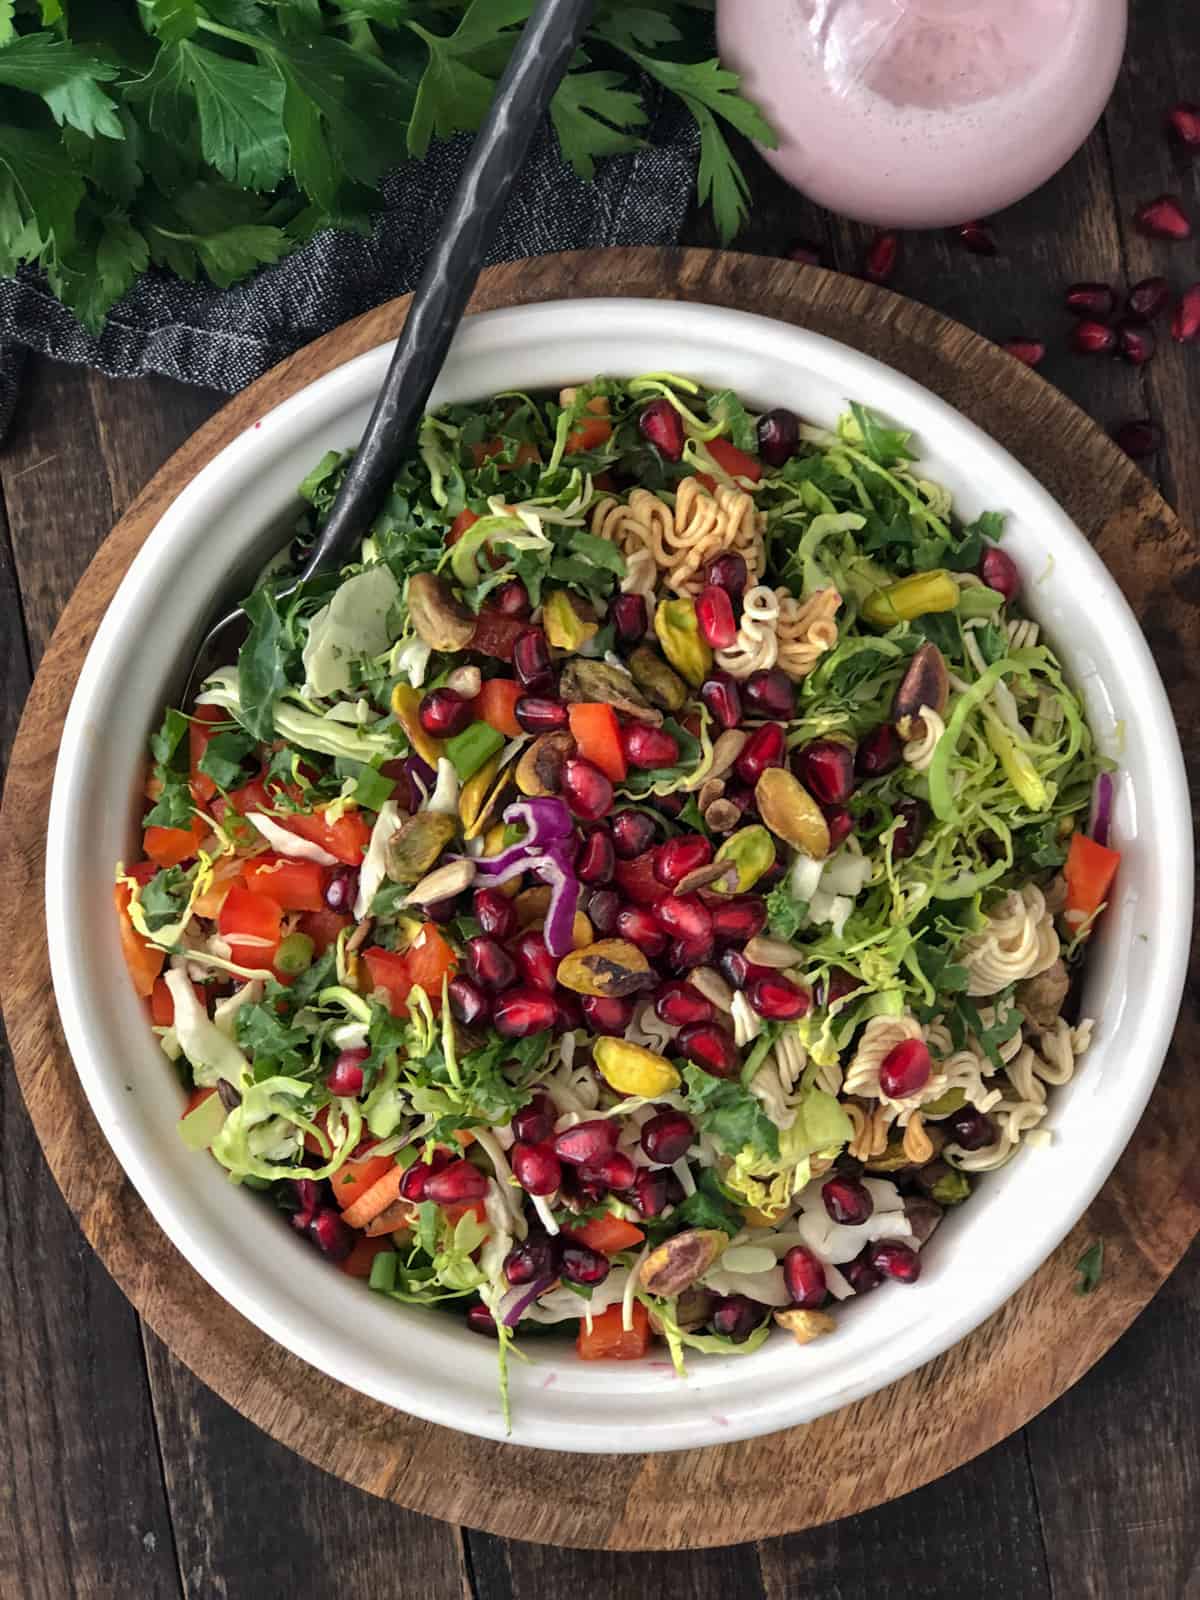 Brussel sprouts slaw with pomegranates, pistachios and red peppers.